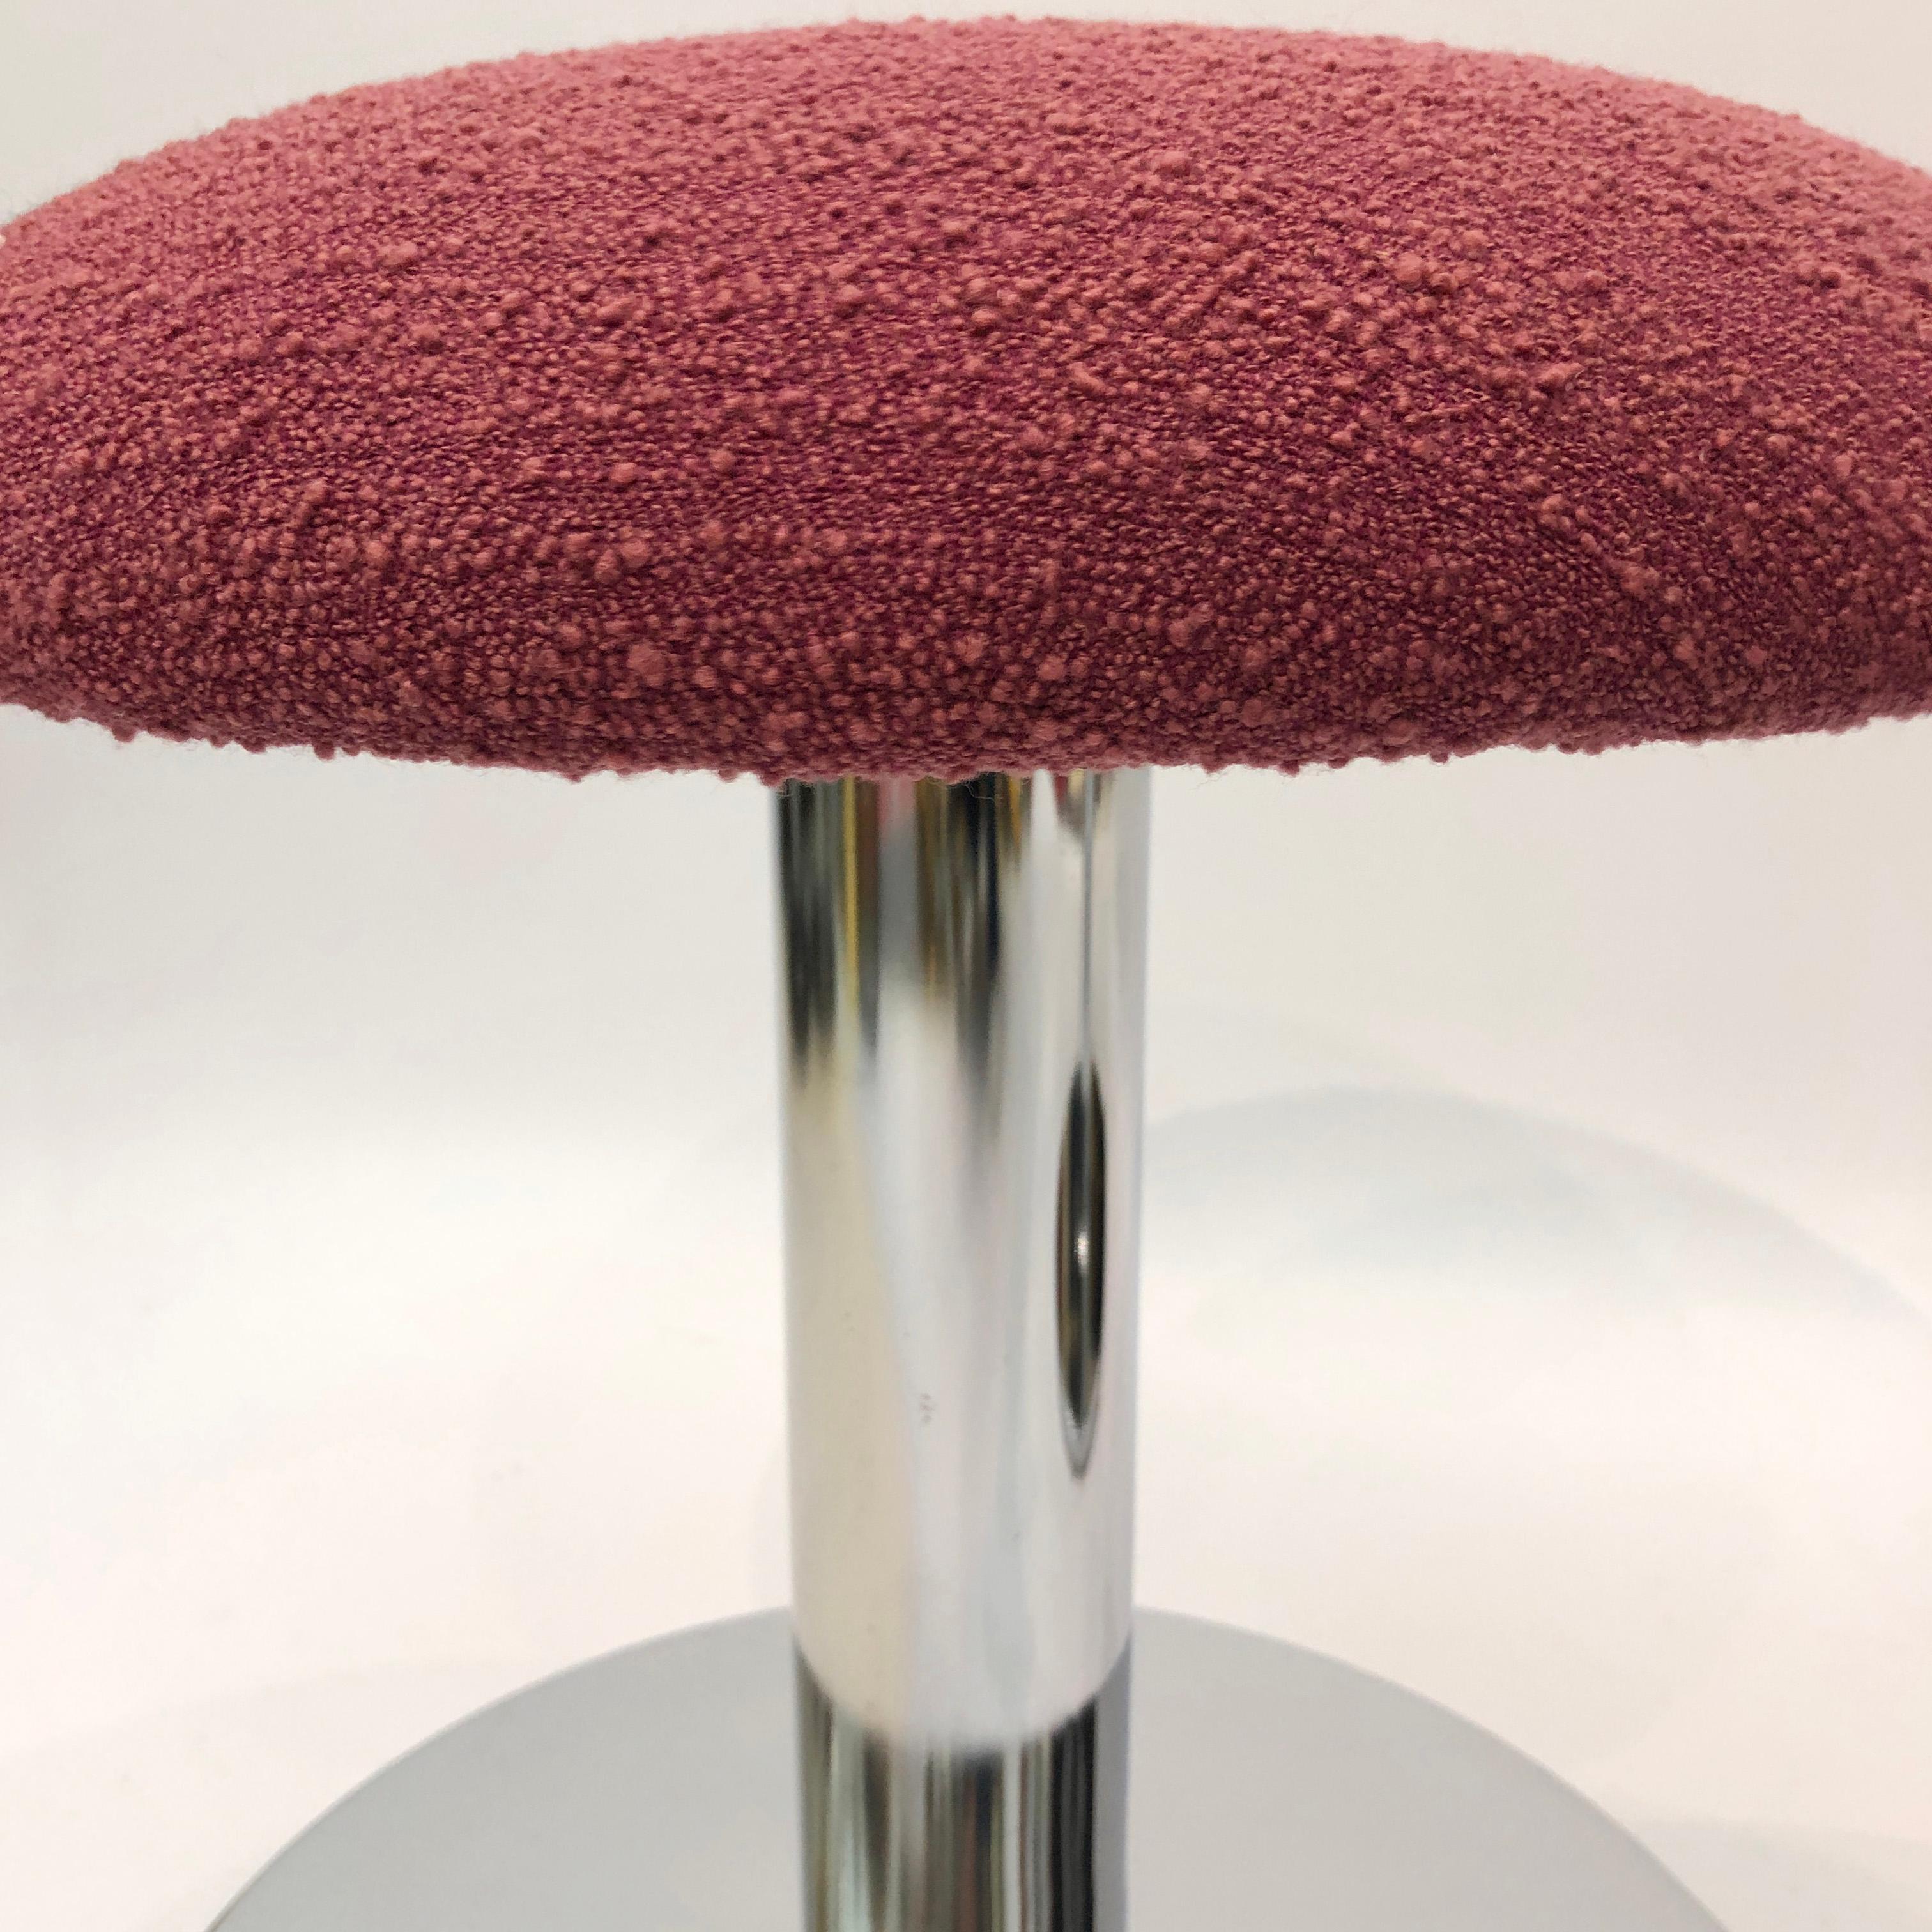 maroon color in stool